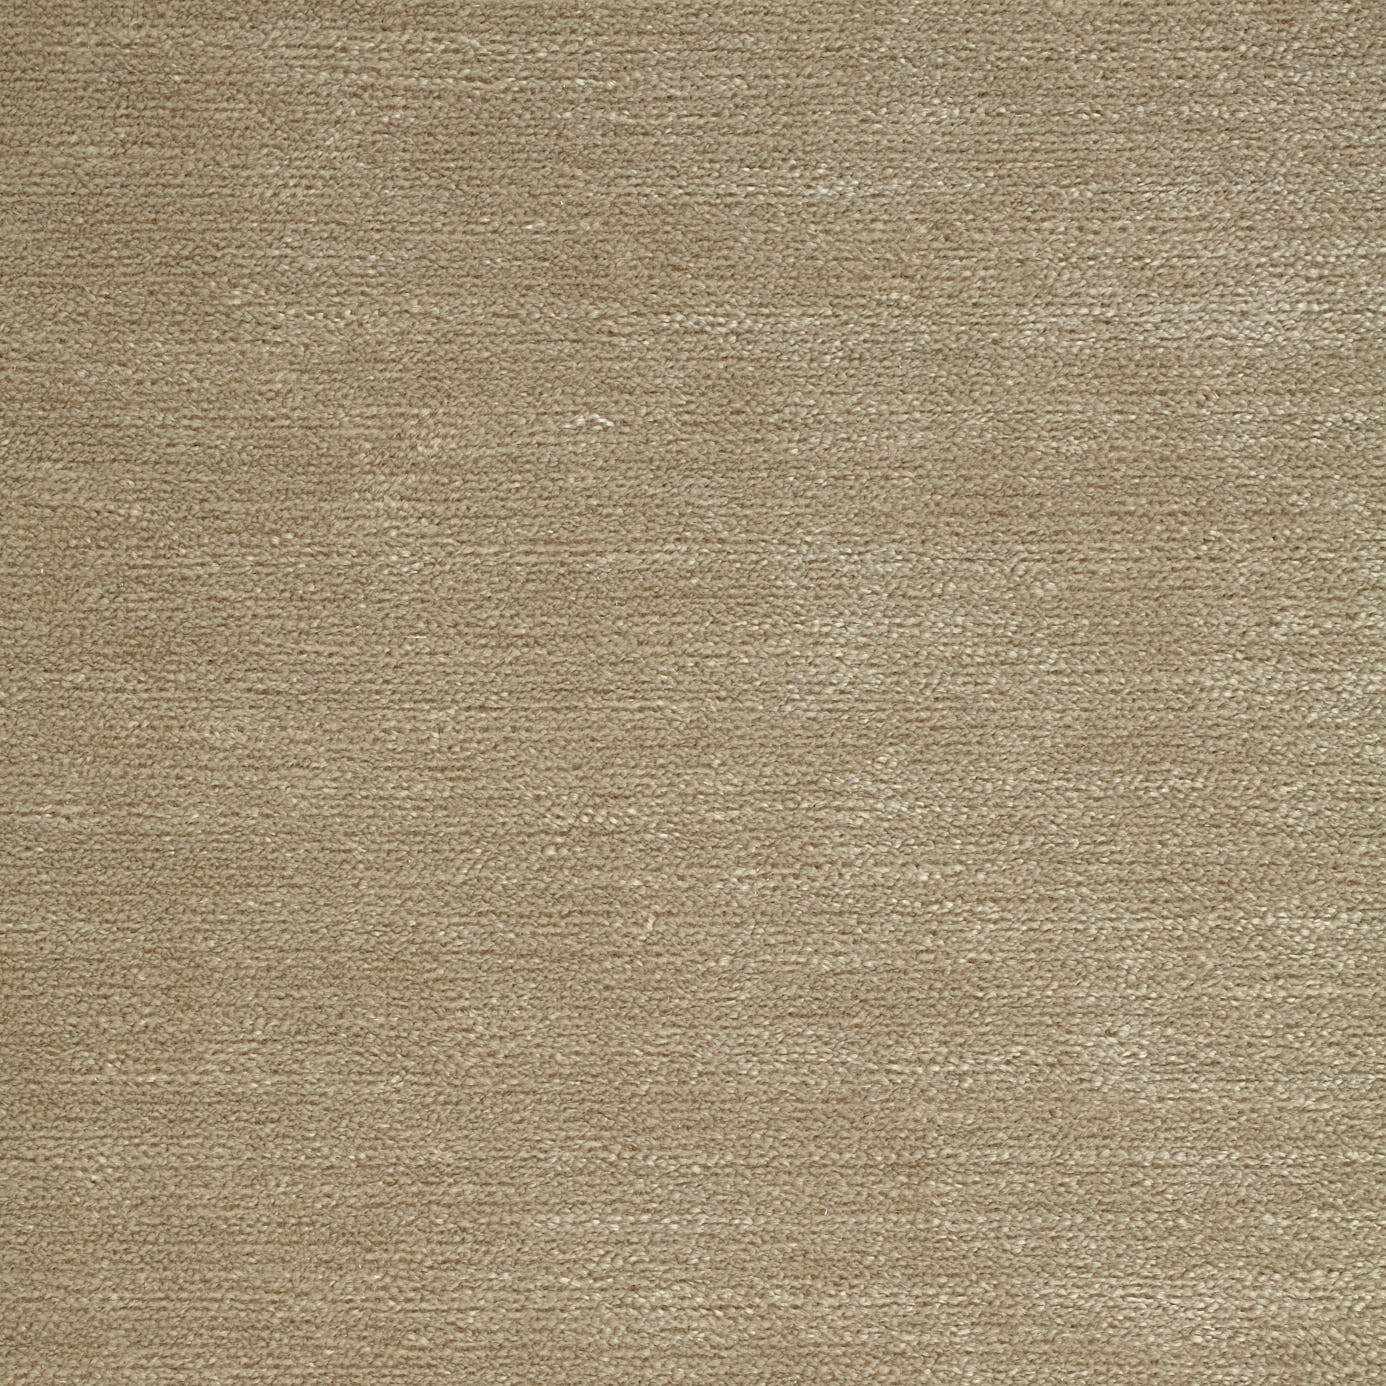 Lusso Jute Fabric by Harlequin